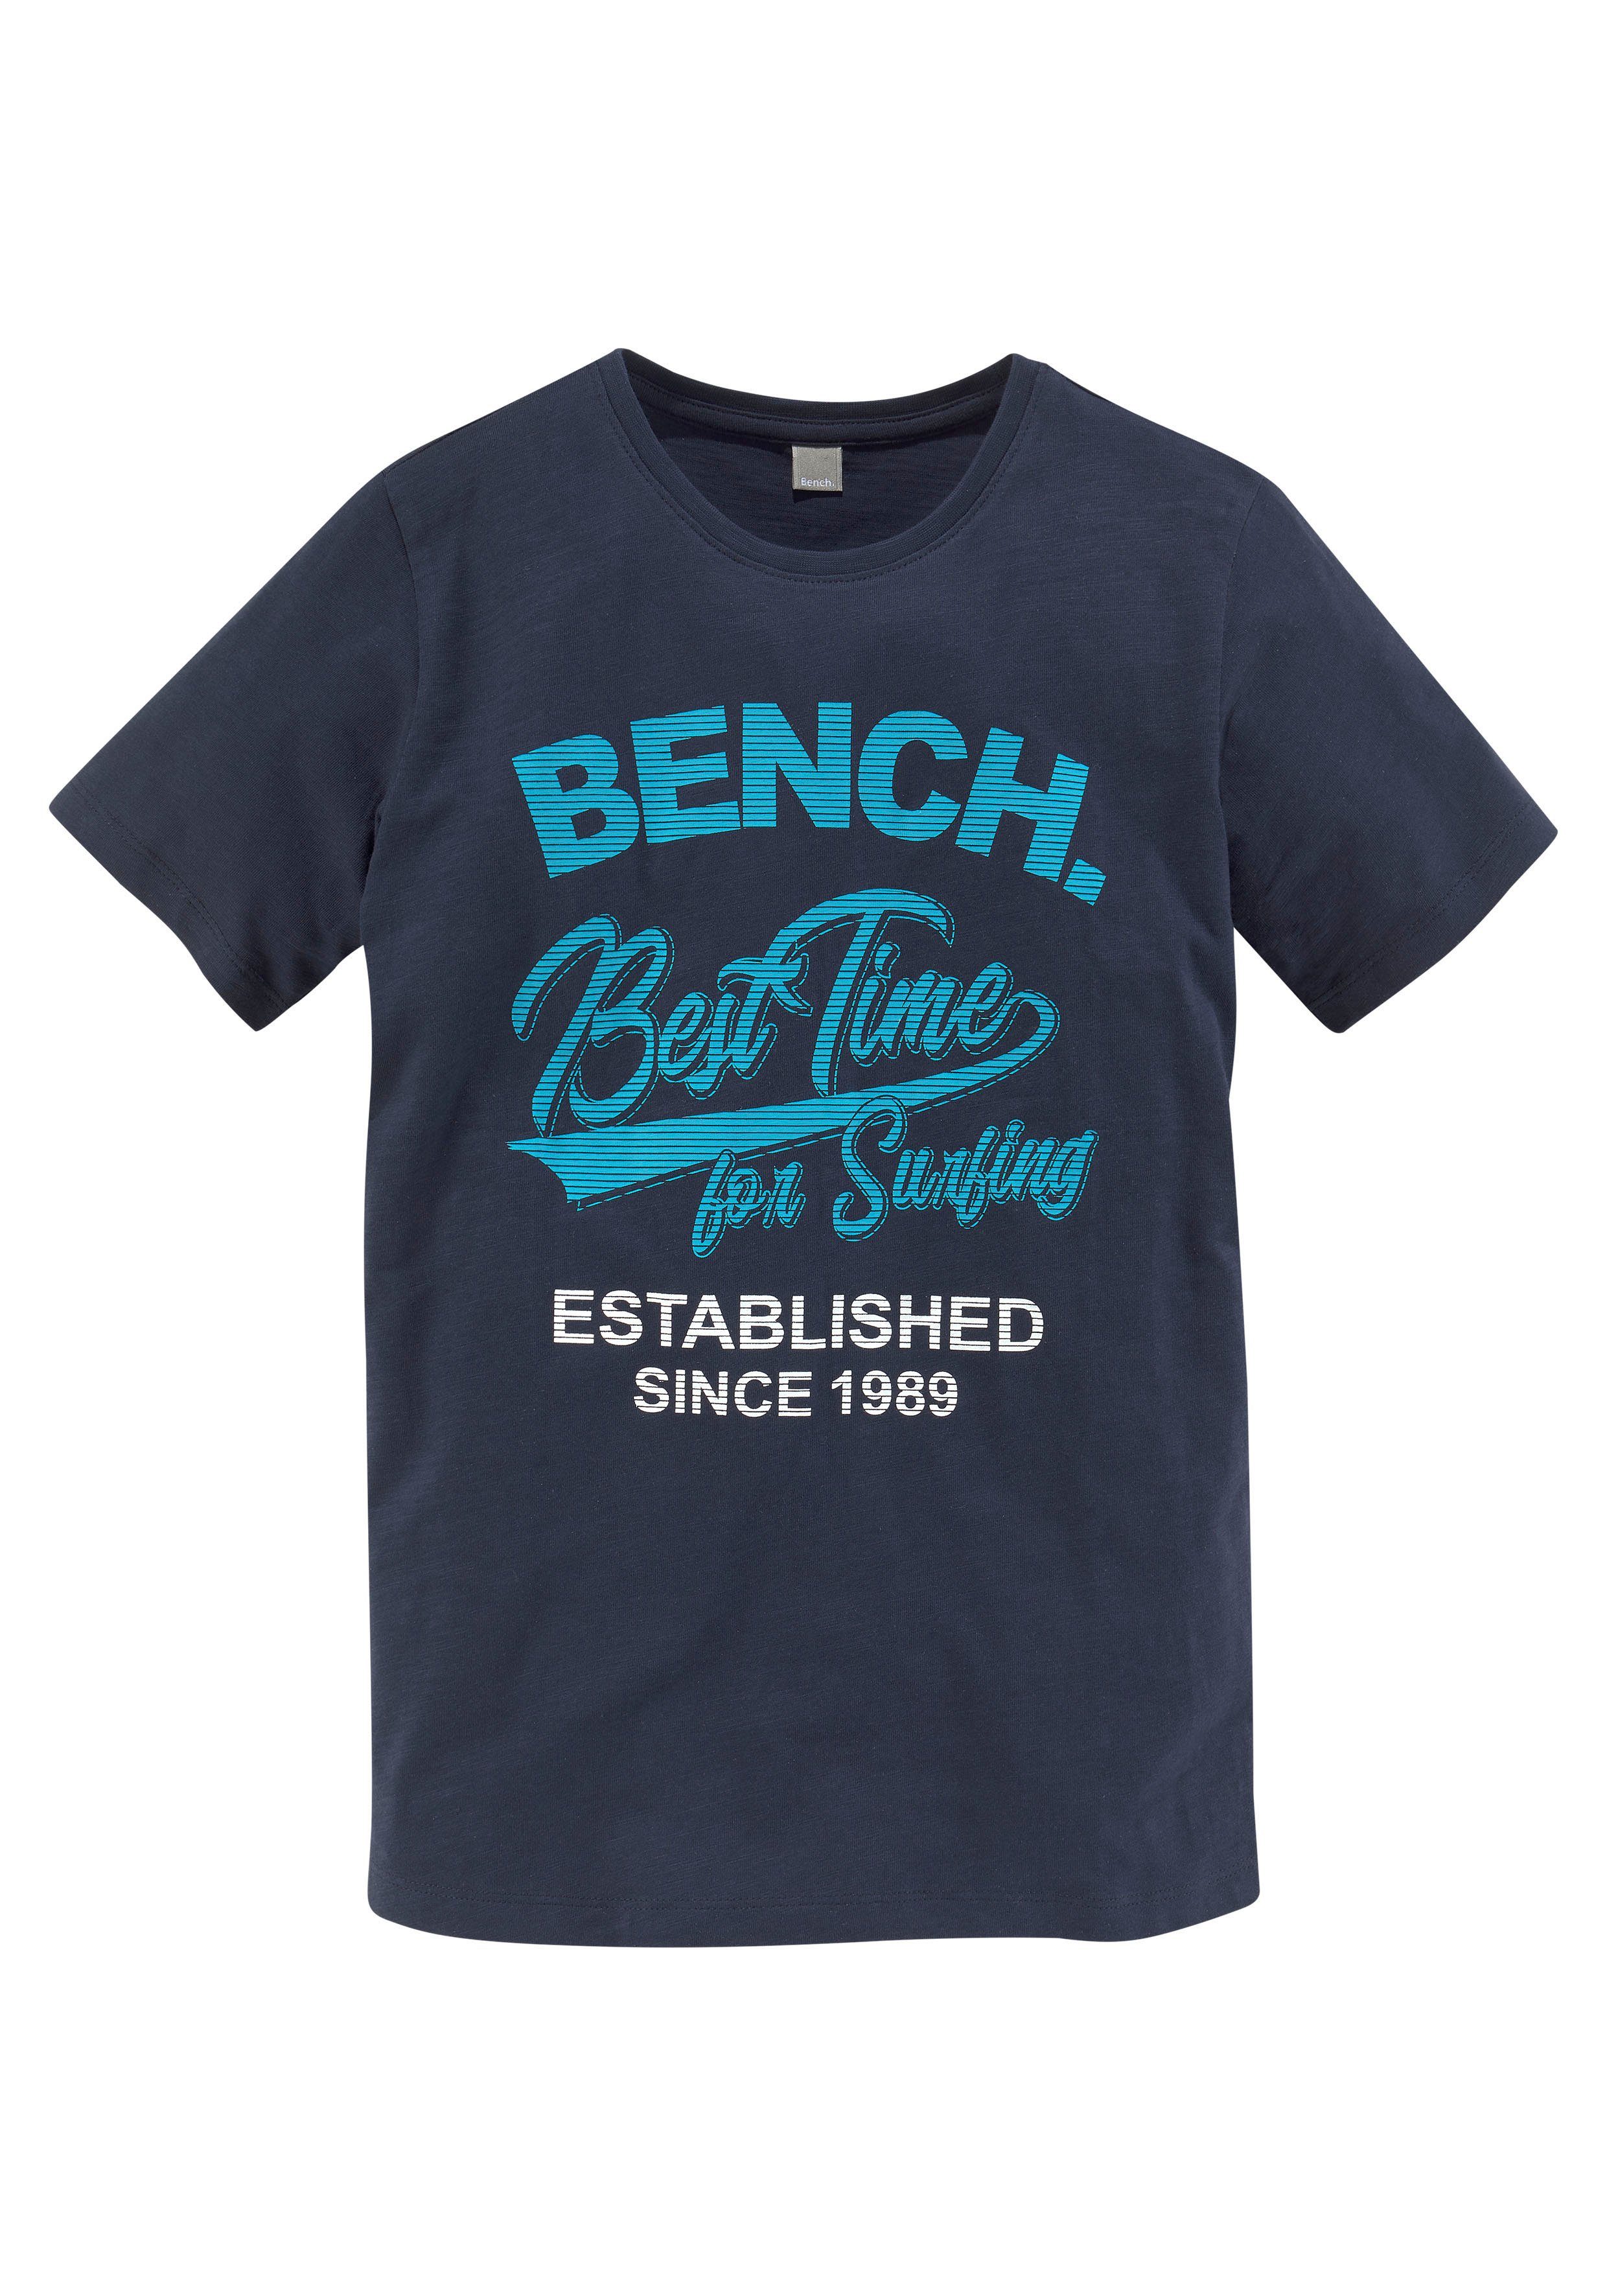 Bench. surfing for time T-Shirt Best